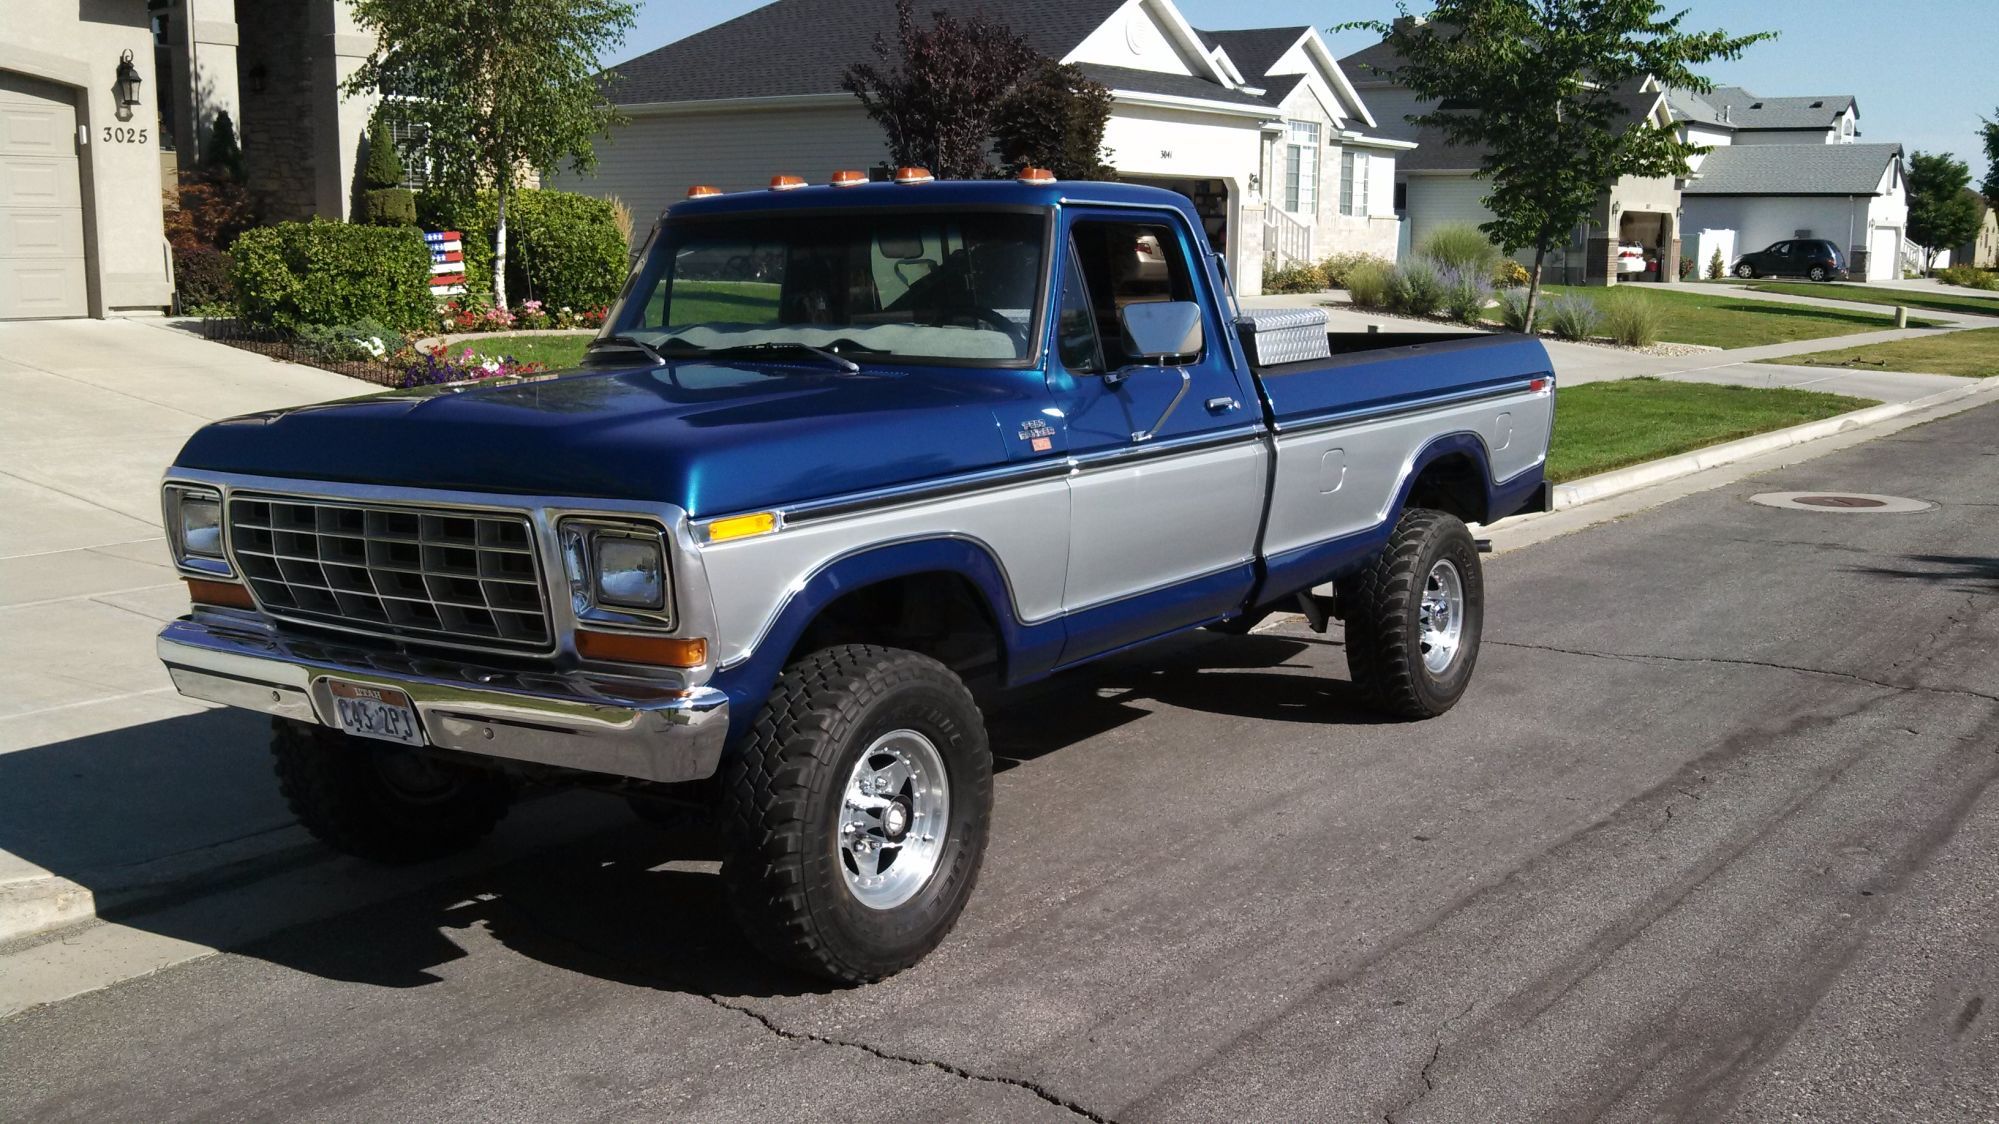 1979 Two Tone Paint Ford Truck Enthusiasts Forums.